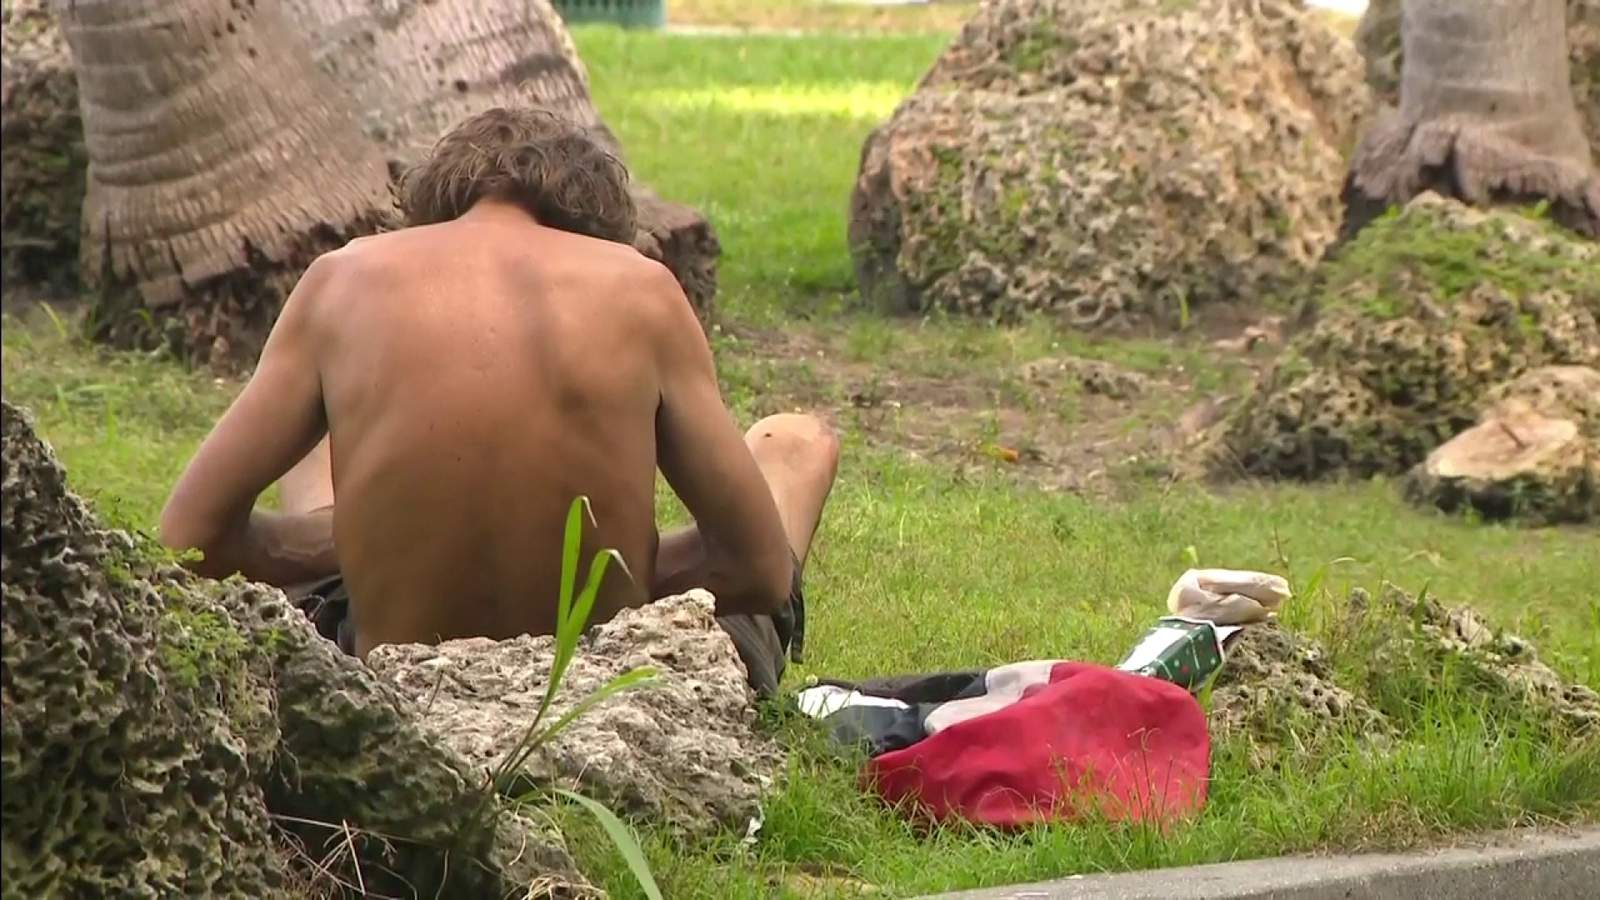 Advocates for homeless rush to offer shelter ahead of temperature drop in South Florida